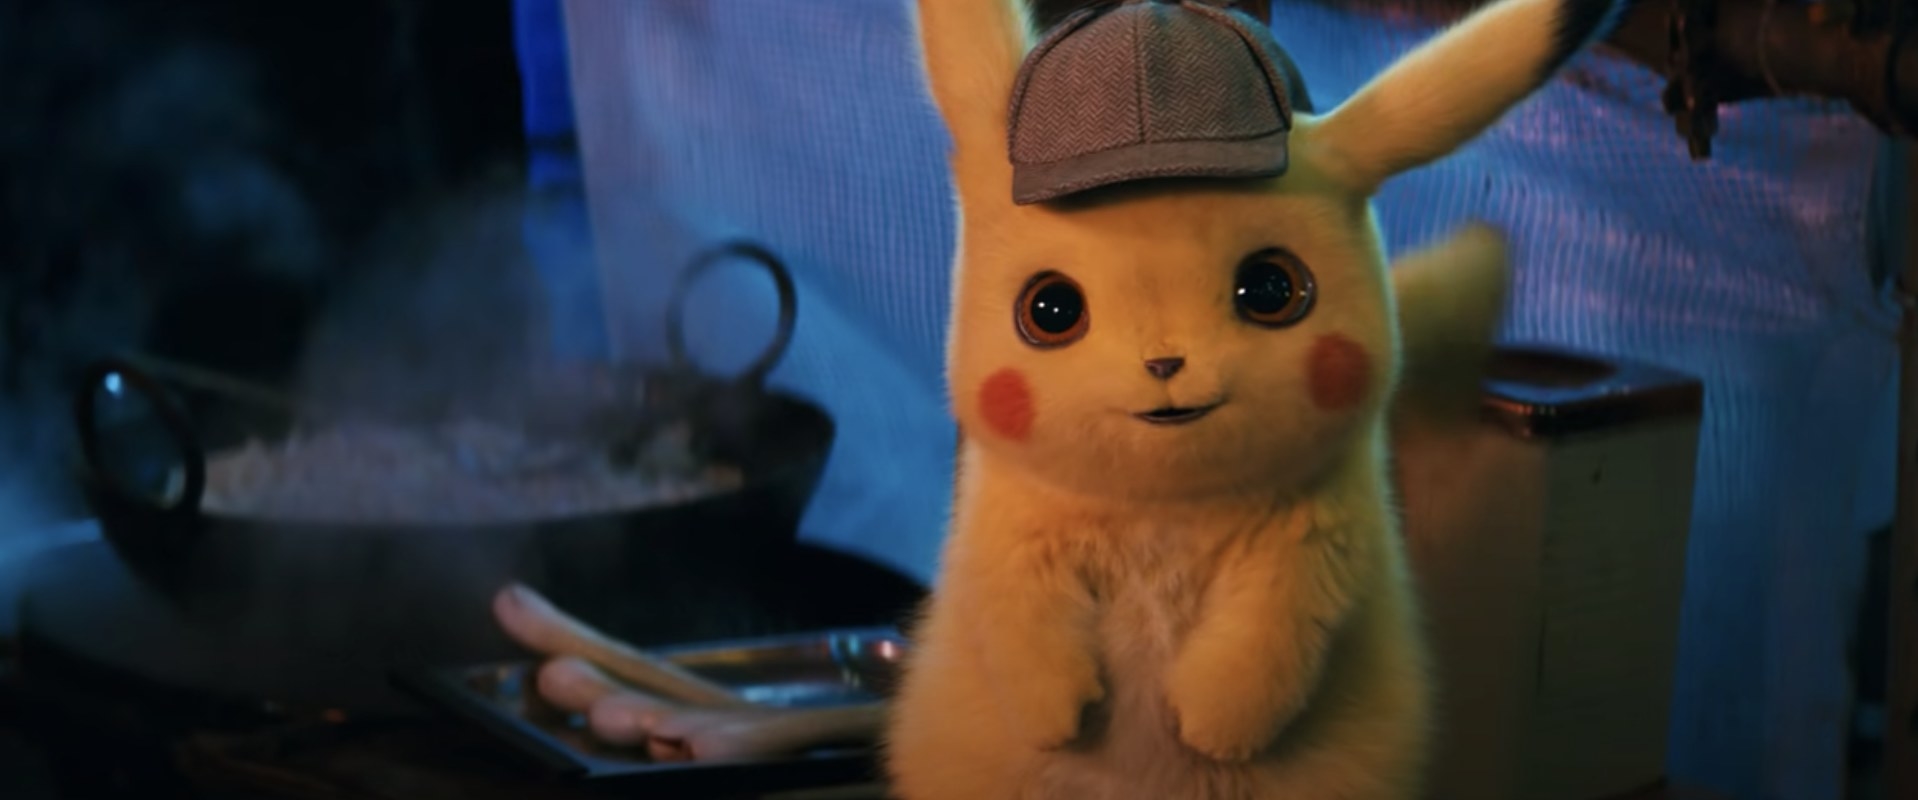 Pikachu in a detective hat